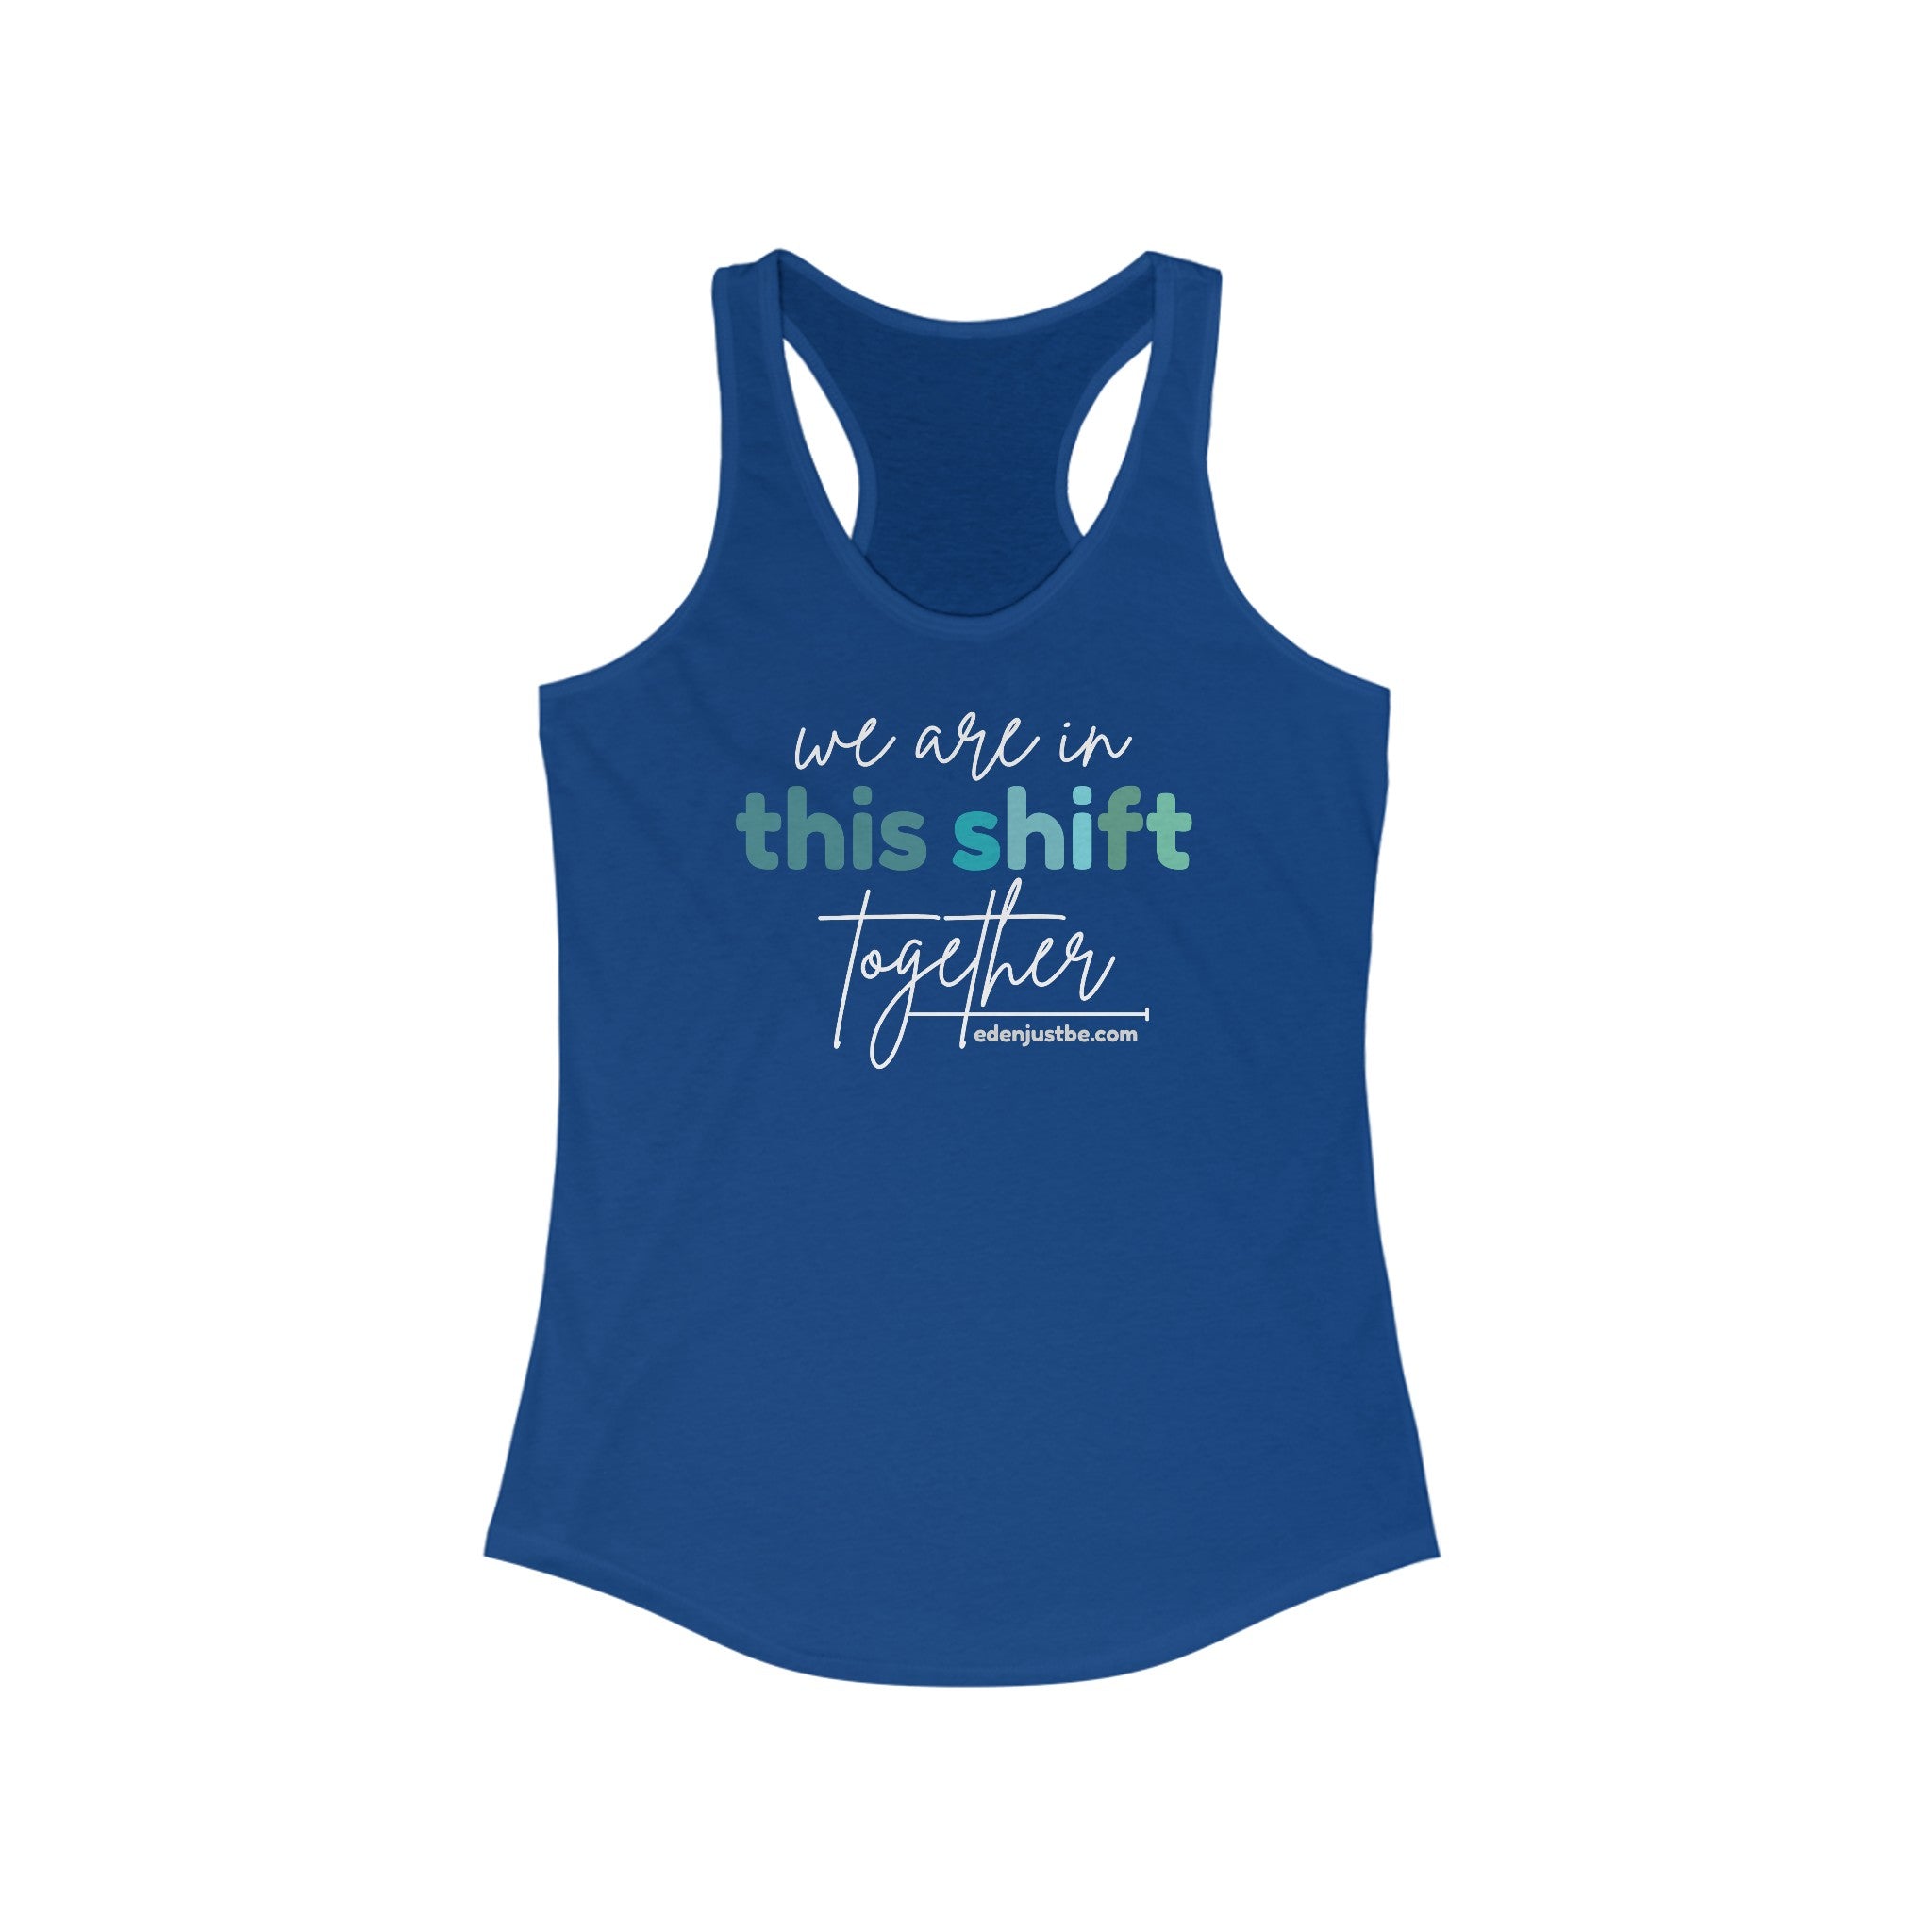 In This Shift Together – Women’s Racerback Tank